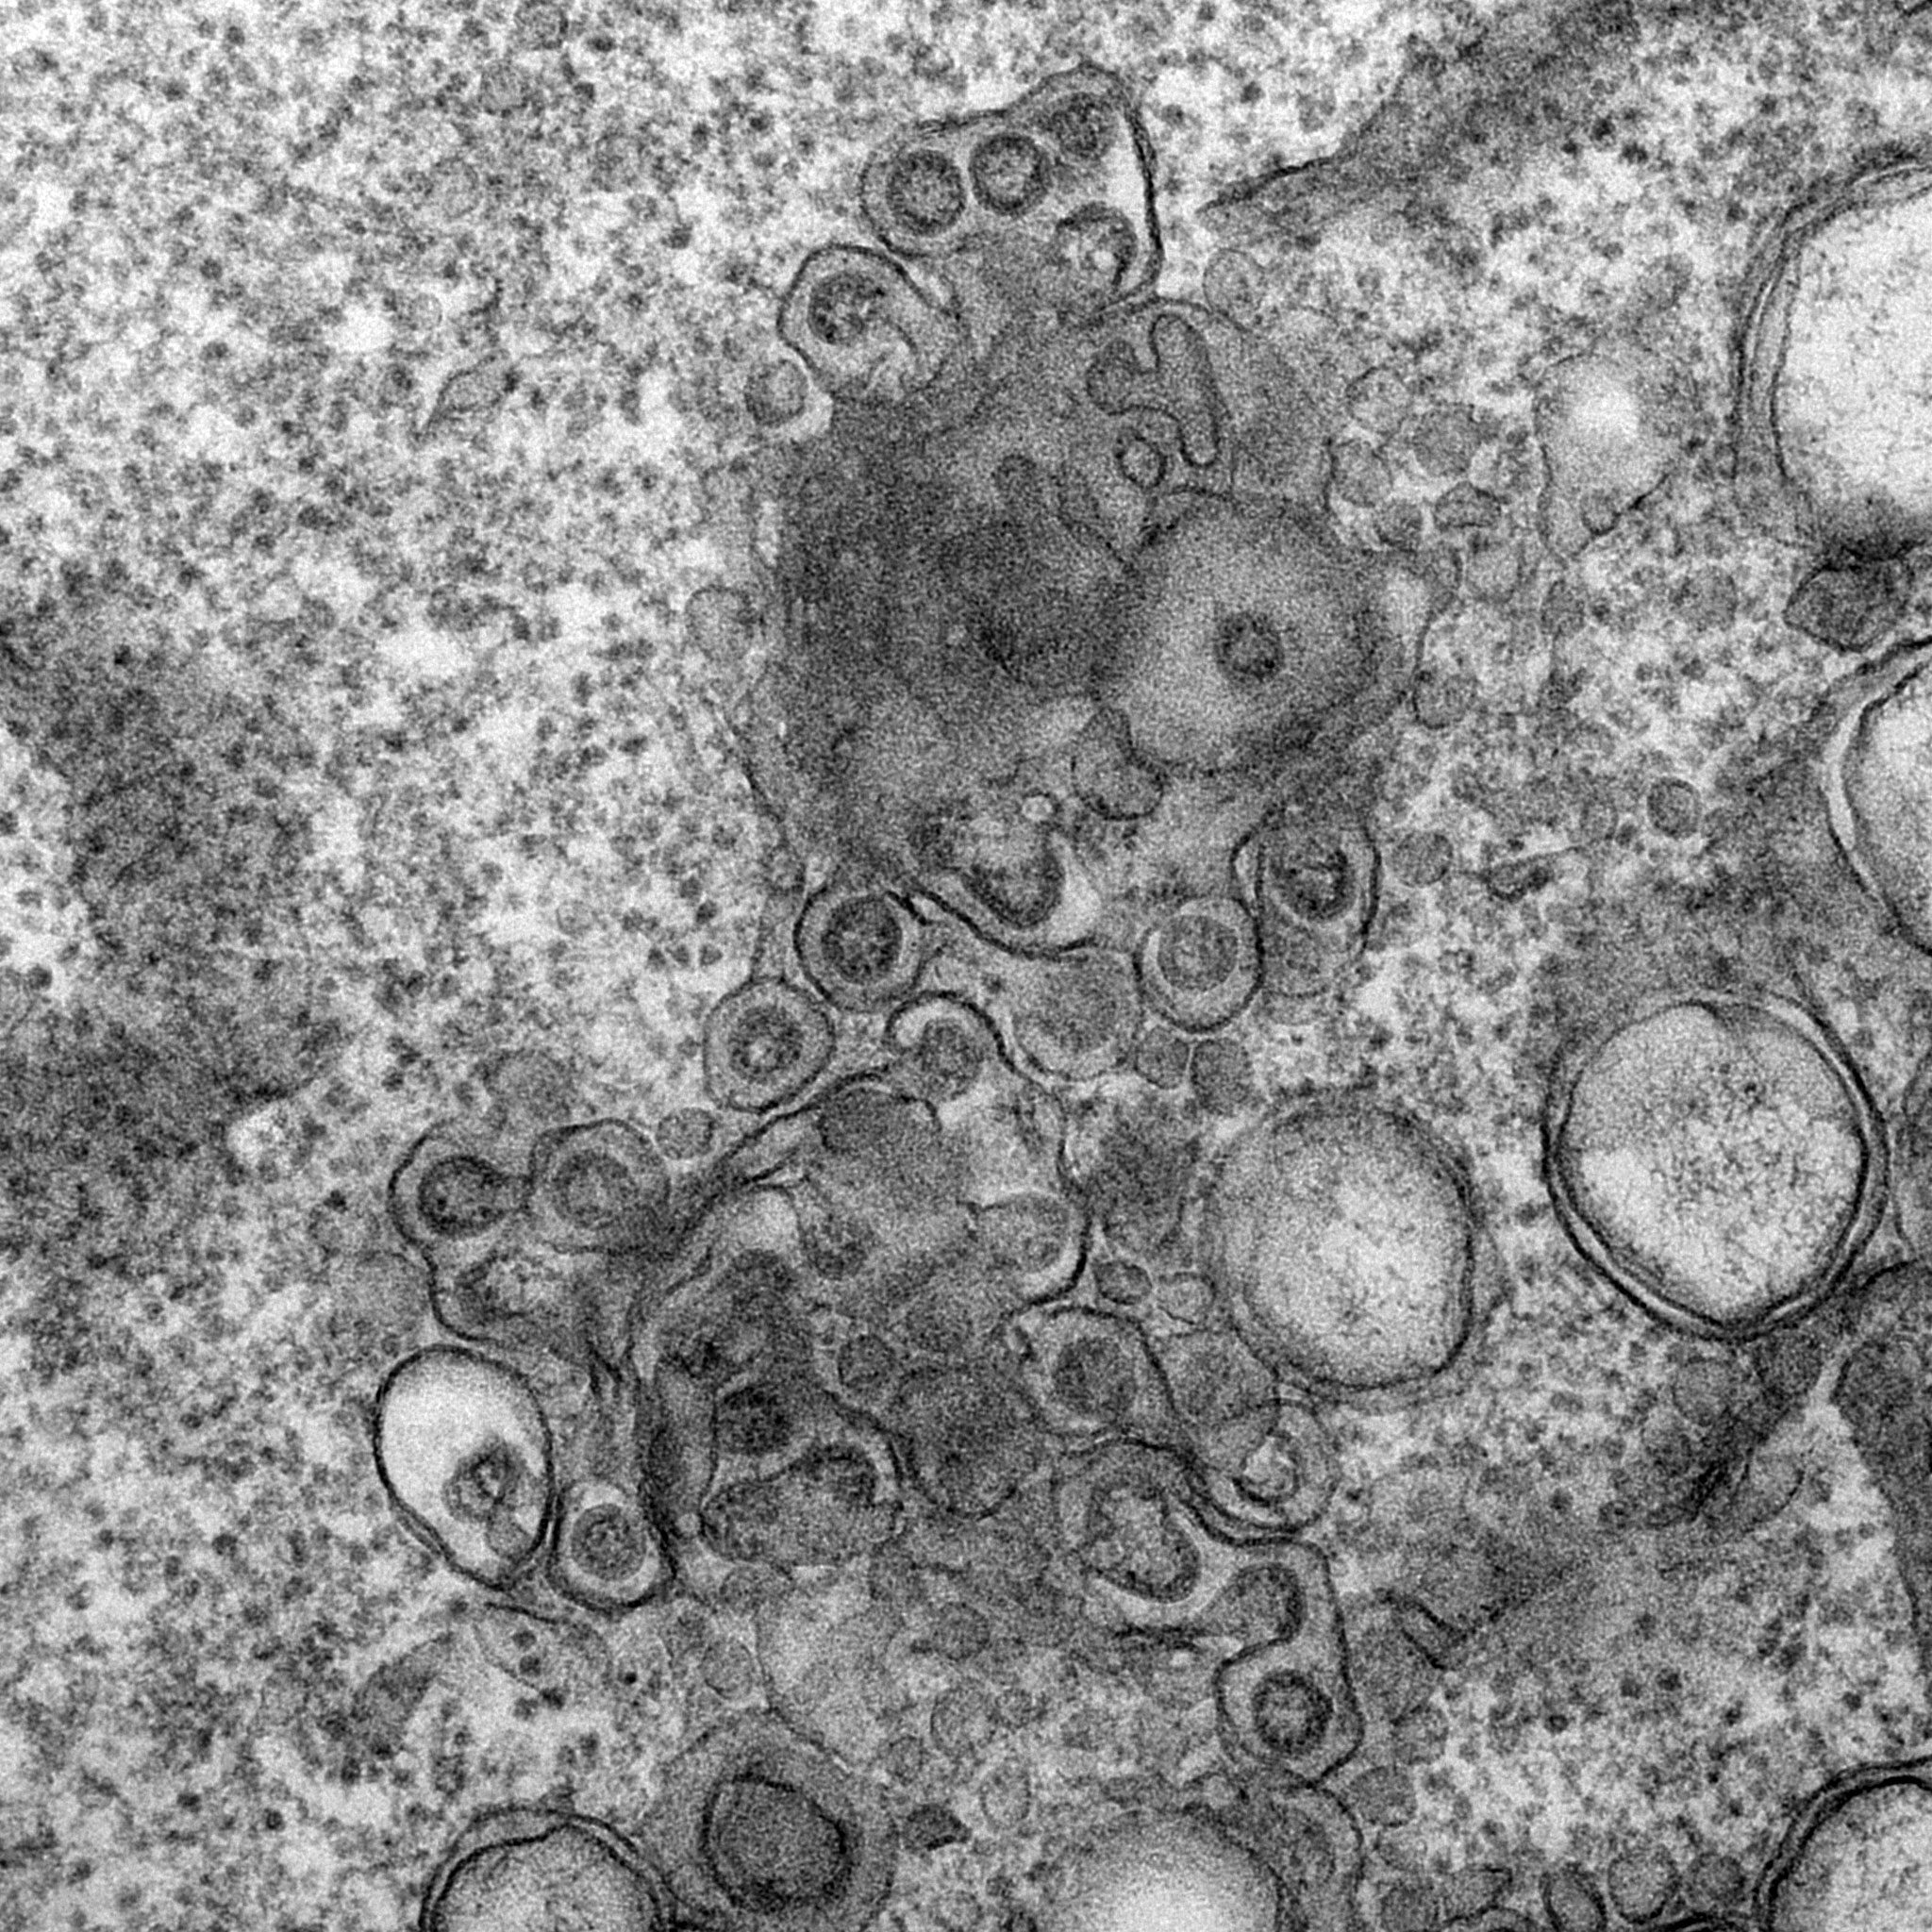 Electron micrograph of Vero E6 cells infected with SARS-CoV-2, 10 h post infection. Virus particles budding into membranes of the ERGIC. See Ogando et al., “SARS-Coronavirus-2 Replication in Vero E6 Cells: Replication Kinetics, Rapid Adaptation, and Cytopathology.” 2020. J. Gen. Virol. doi: 10.1099/jgv.0.001453 PMID 32568027. Courtesy of Ronald Limpens, Montse Bárcena and Eric Snijder, Leiden University Medical Center, the Netherlands.